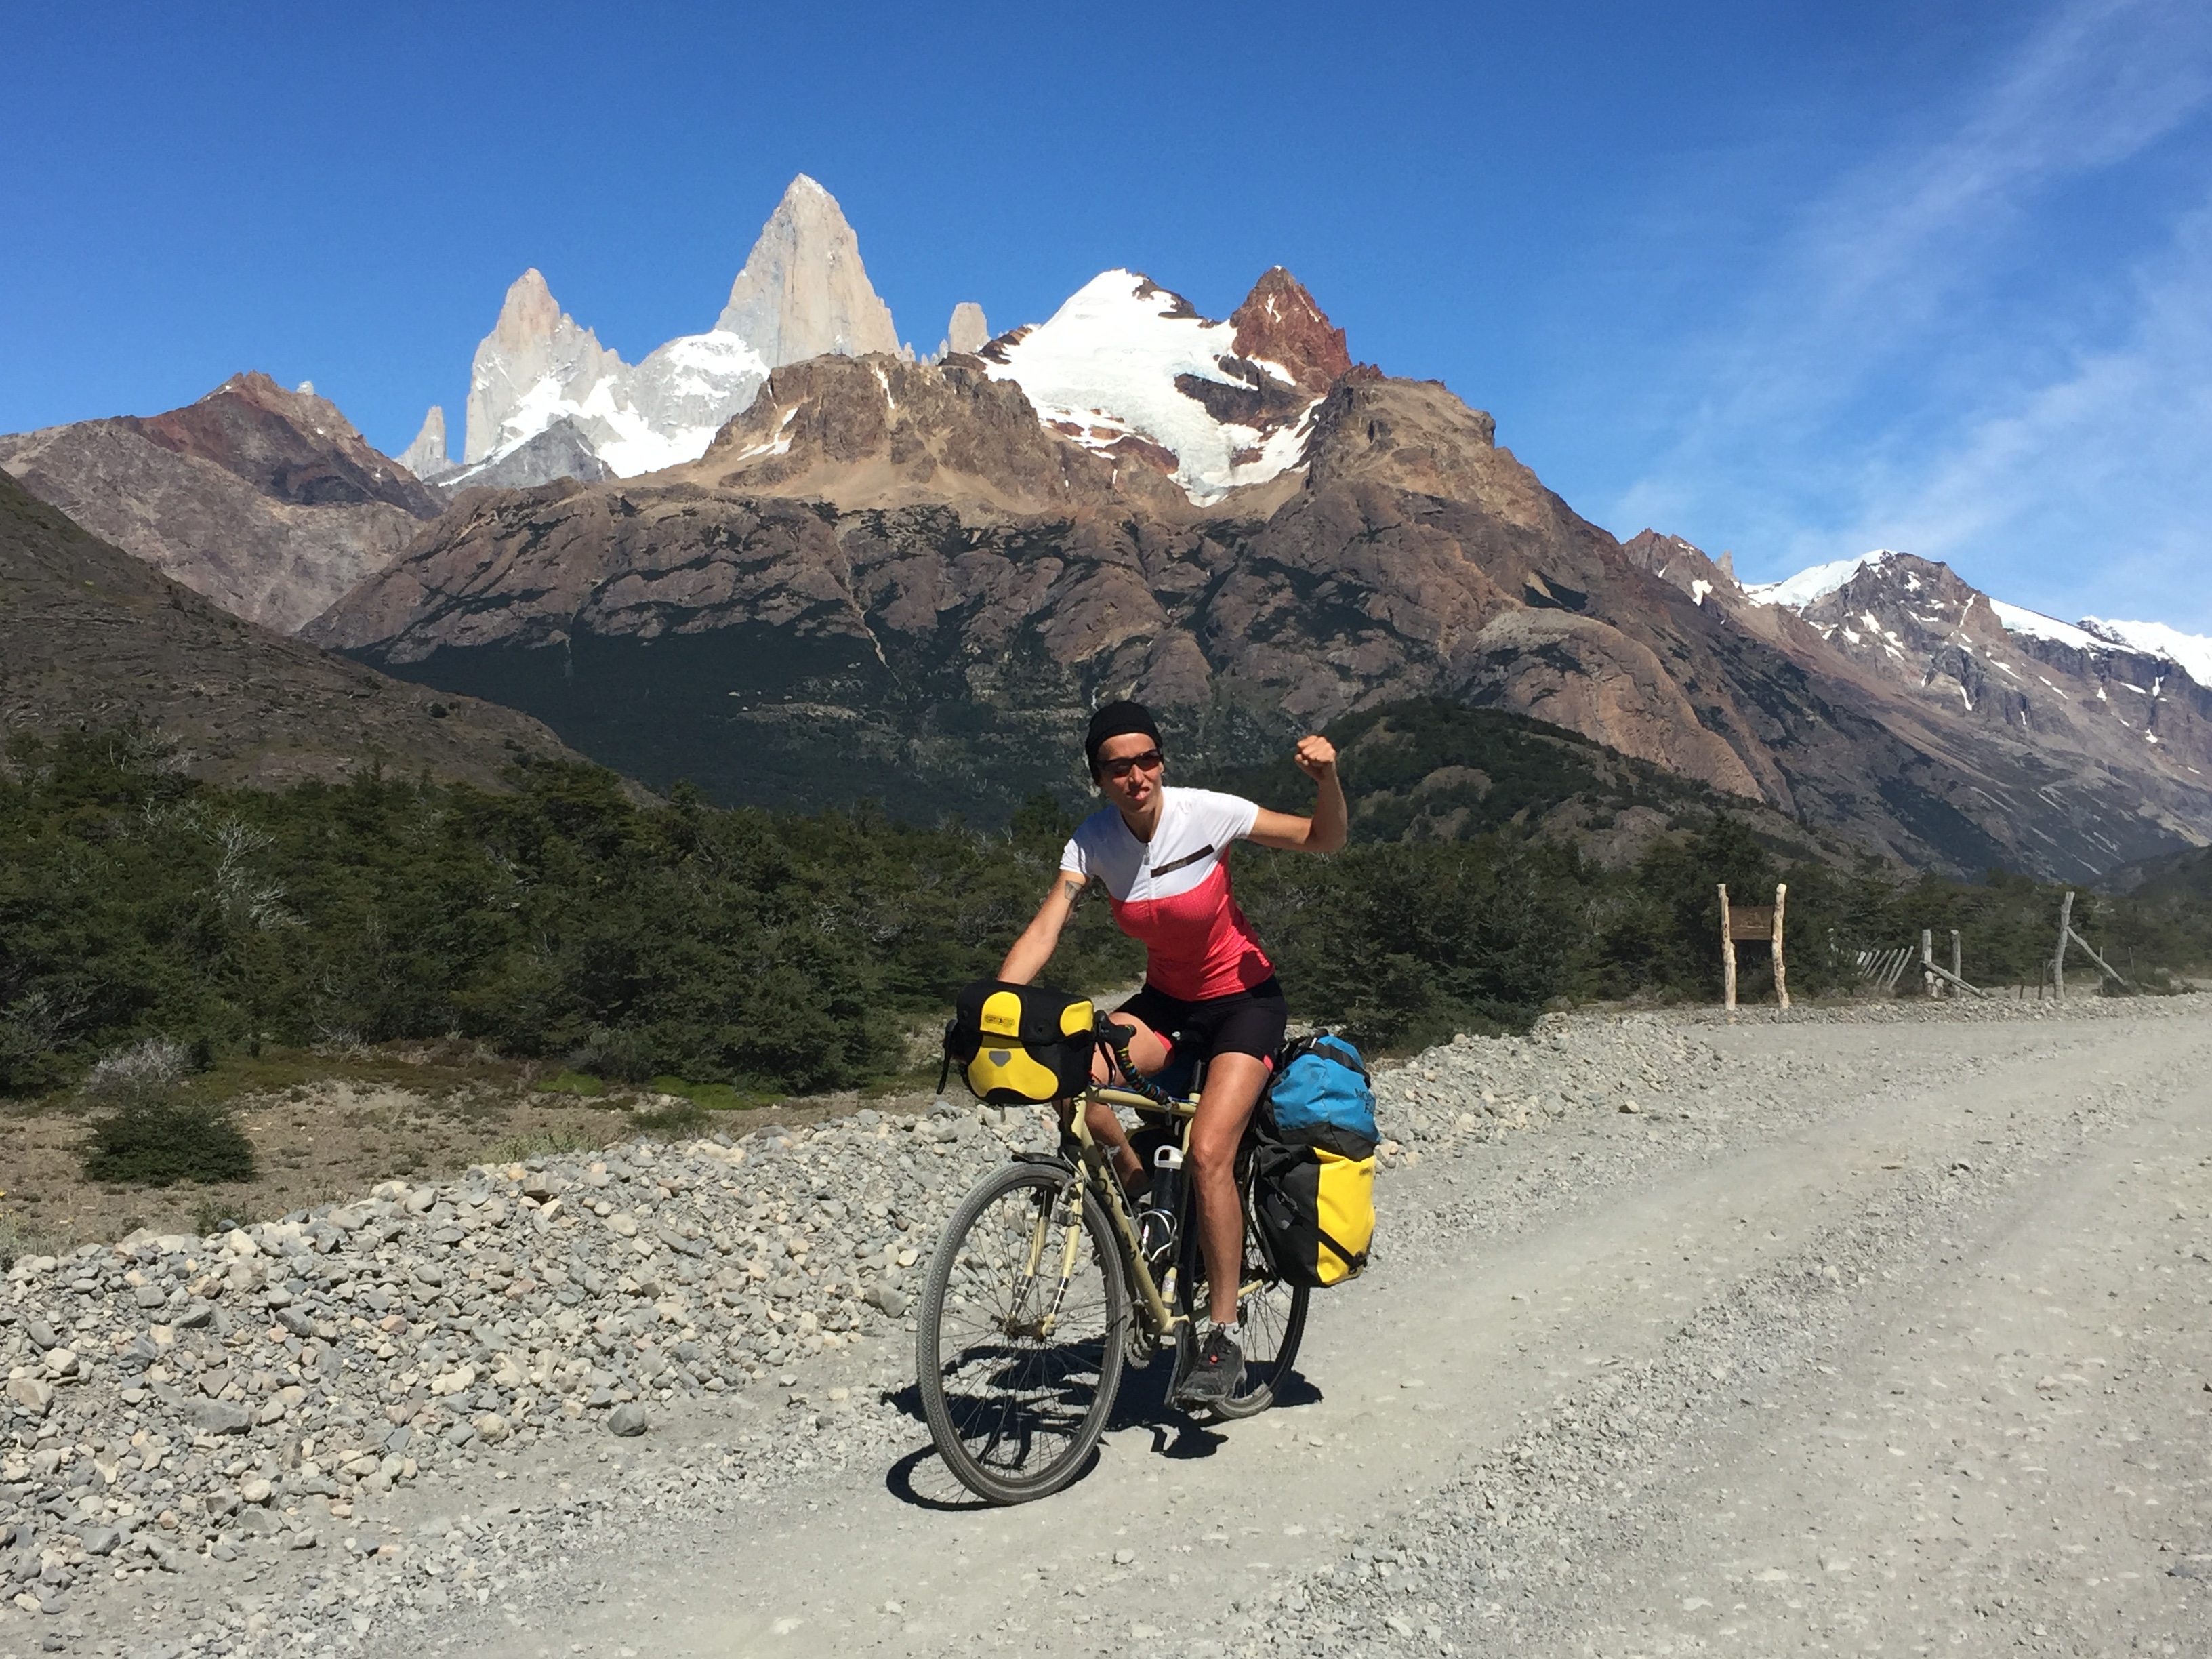 Where/what is The Patagonia?, Pedal Chile